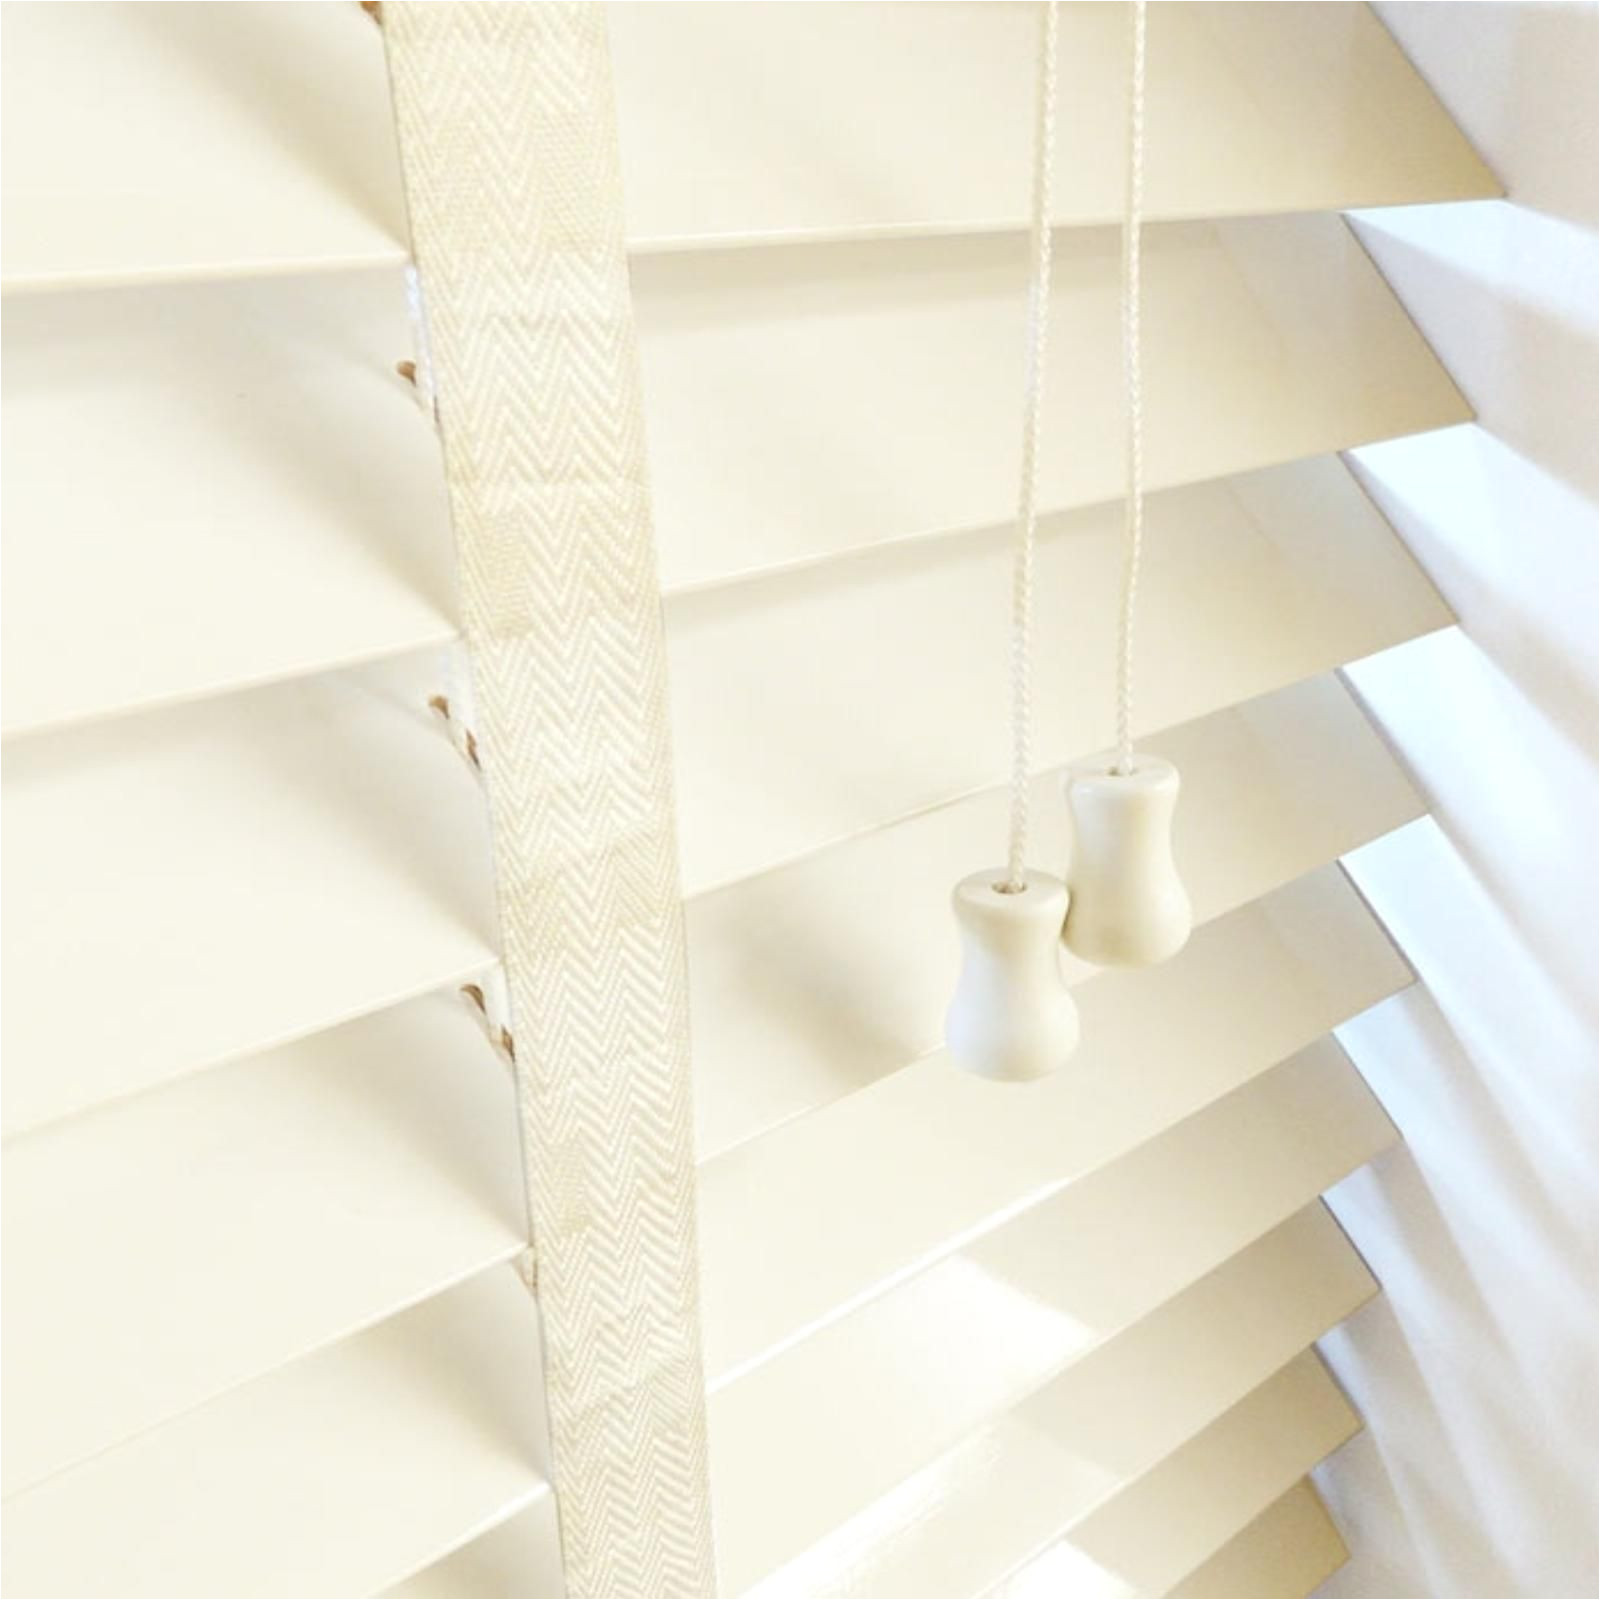 express delivery wooden venetian blinds despatched within 3 working days 50 mm white colour wooden slats basswod wich is both light and sturdy